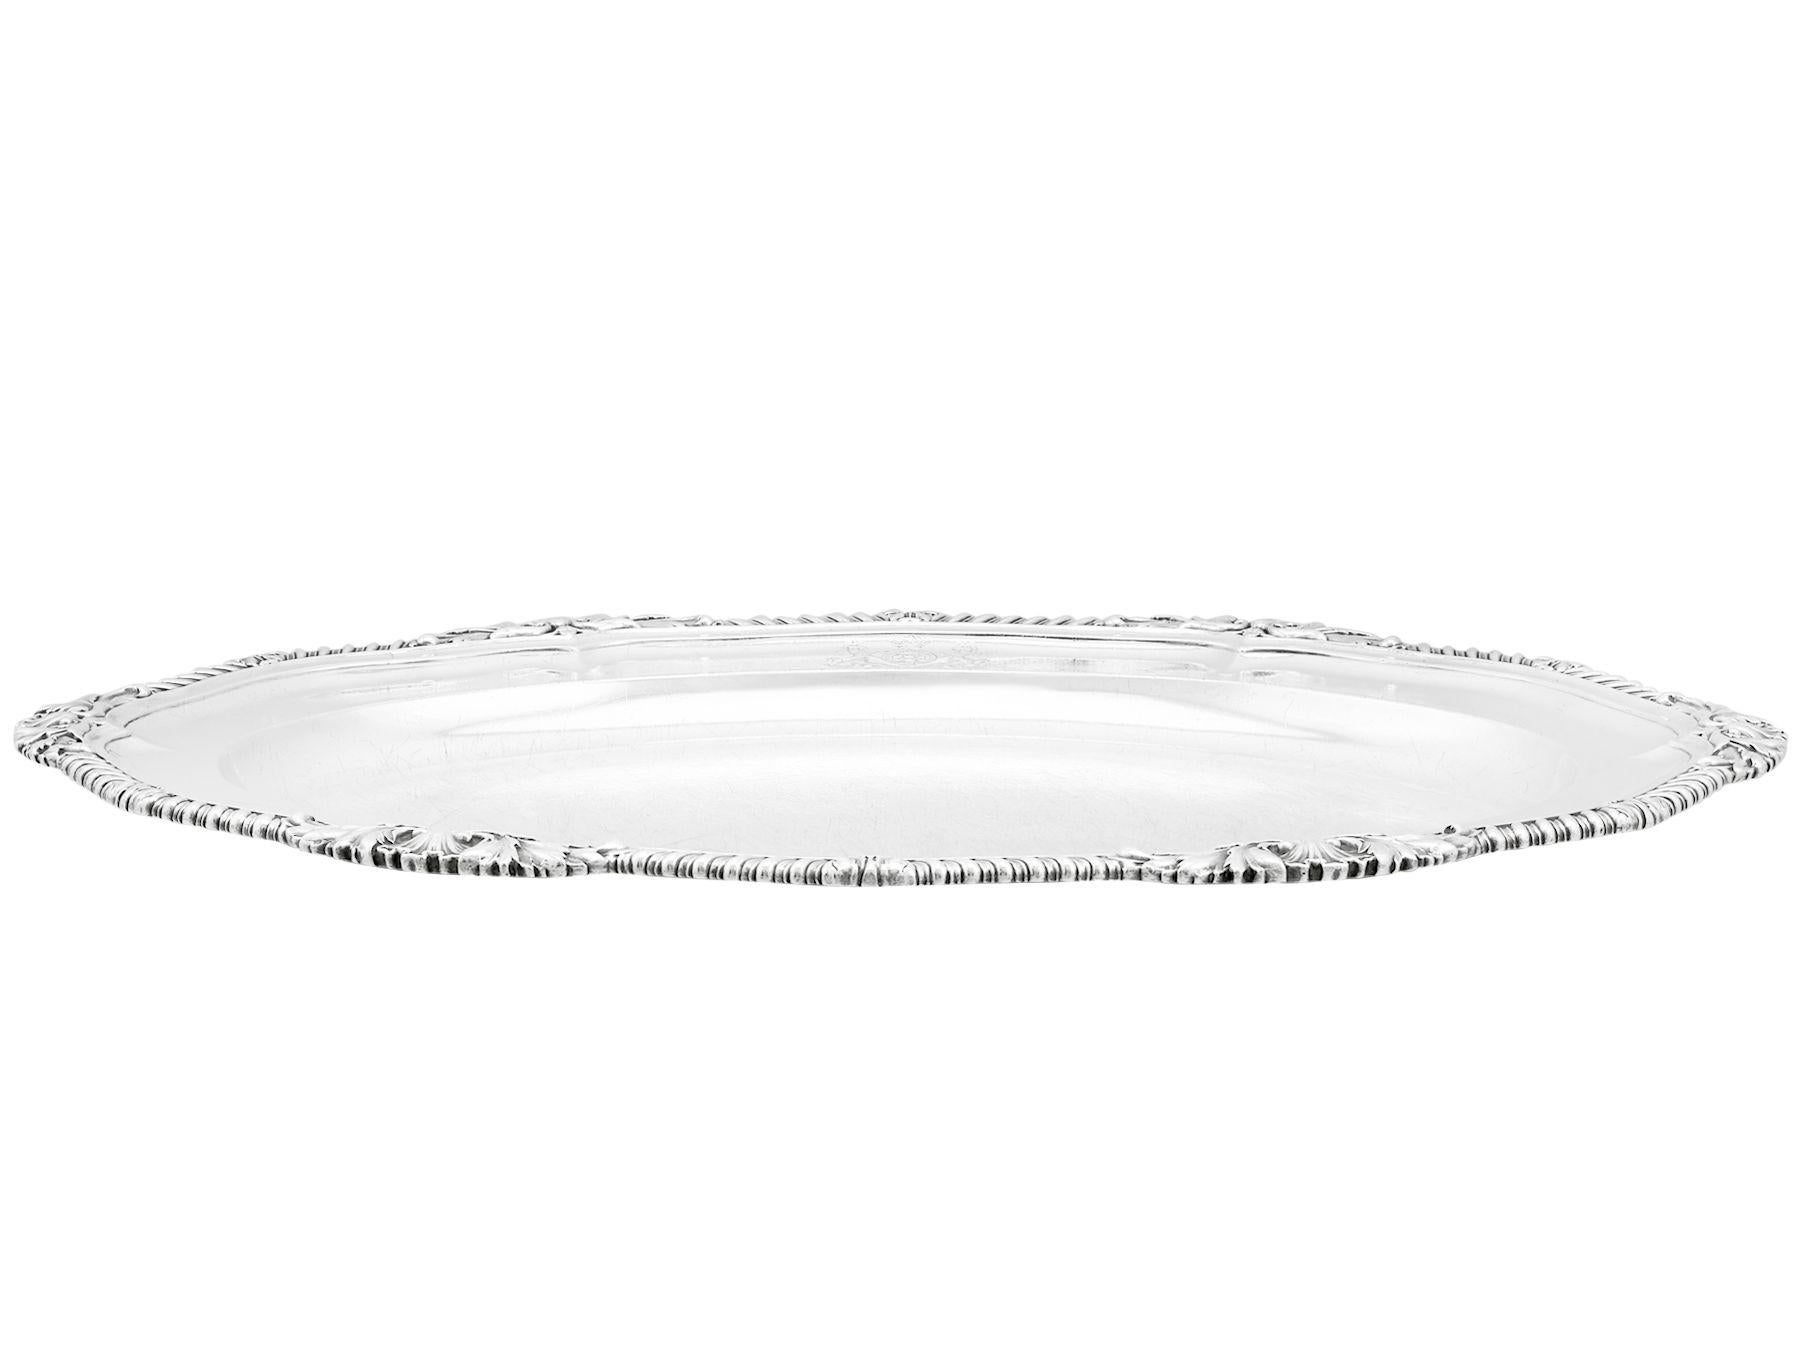 An exceptional, fine and impressive antique George IV English sterling silver platter made by Paul Storr, an addition to our dining silverware collection.

This exceptional antique George IV sterling silver serving platter by Paul Storr has an